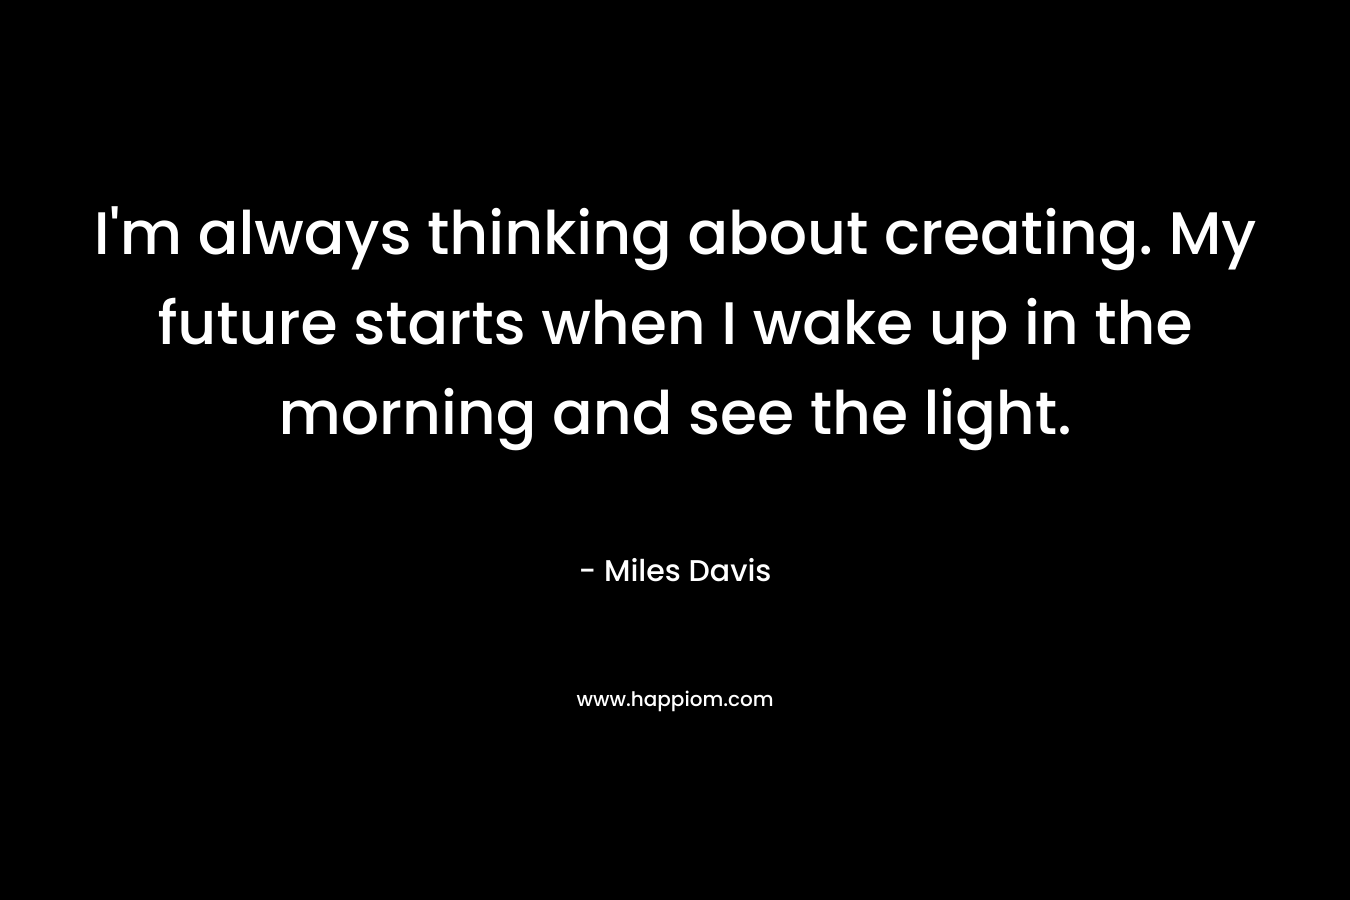 I’m always thinking about creating. My future starts when I wake up in the morning and see the light. – Miles Davis